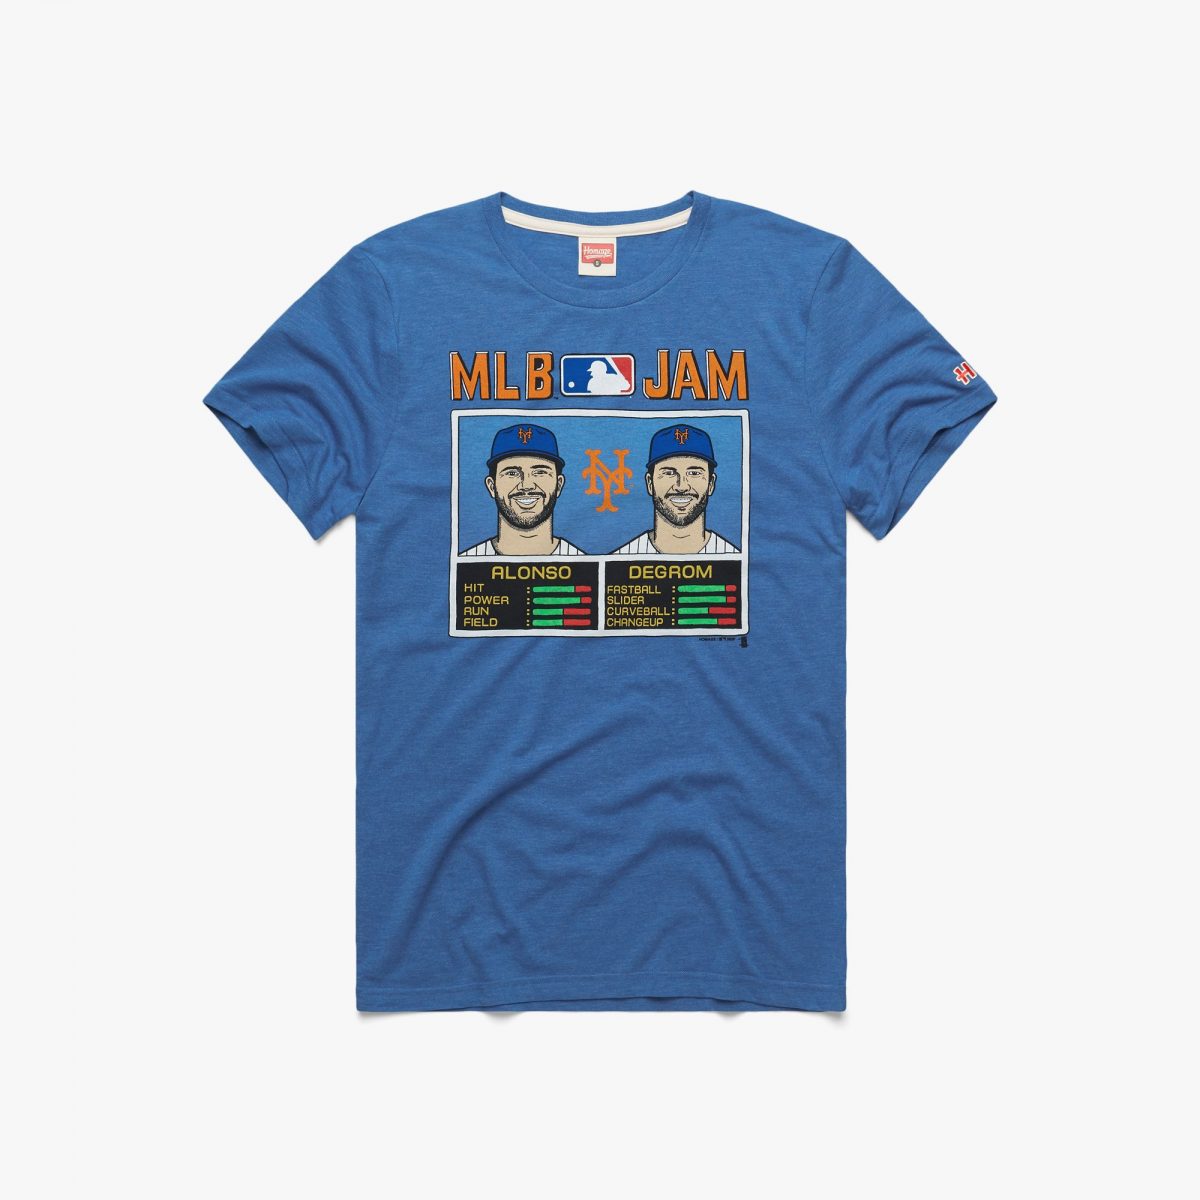 MLB Jam Mets Alonso And deGrom